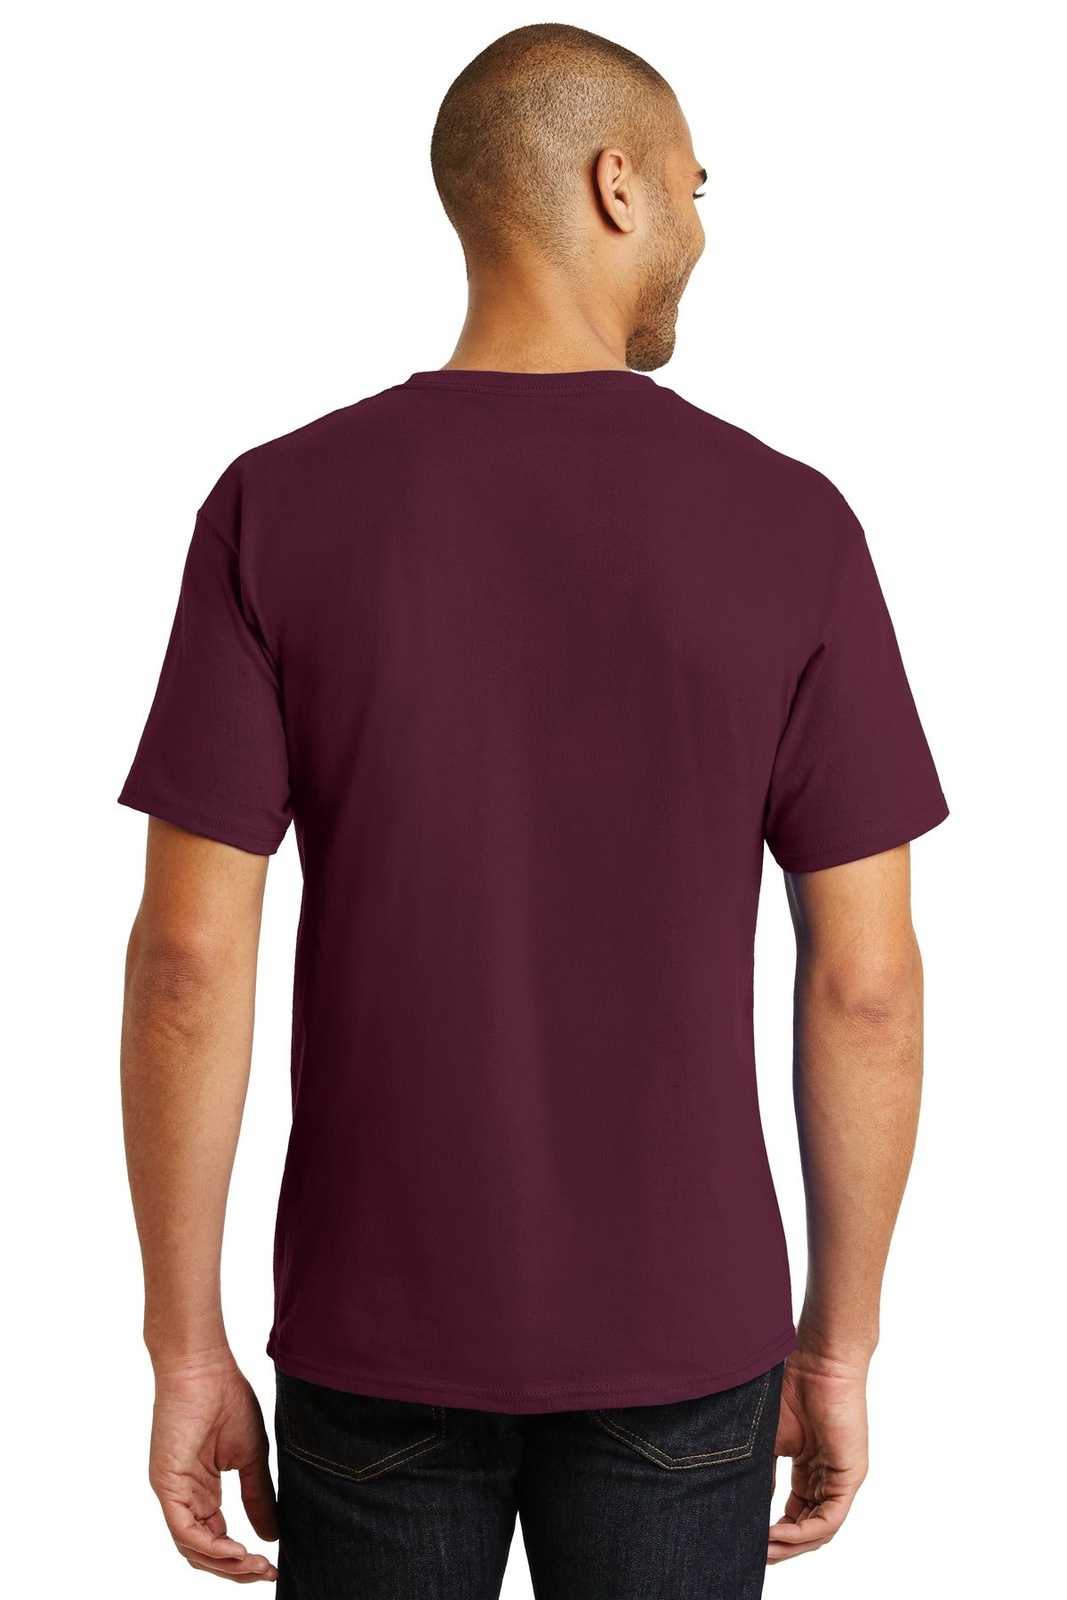 Hanes 5250 Tagless 100% Cotton T-Shirt - Maroon - HIT a Double